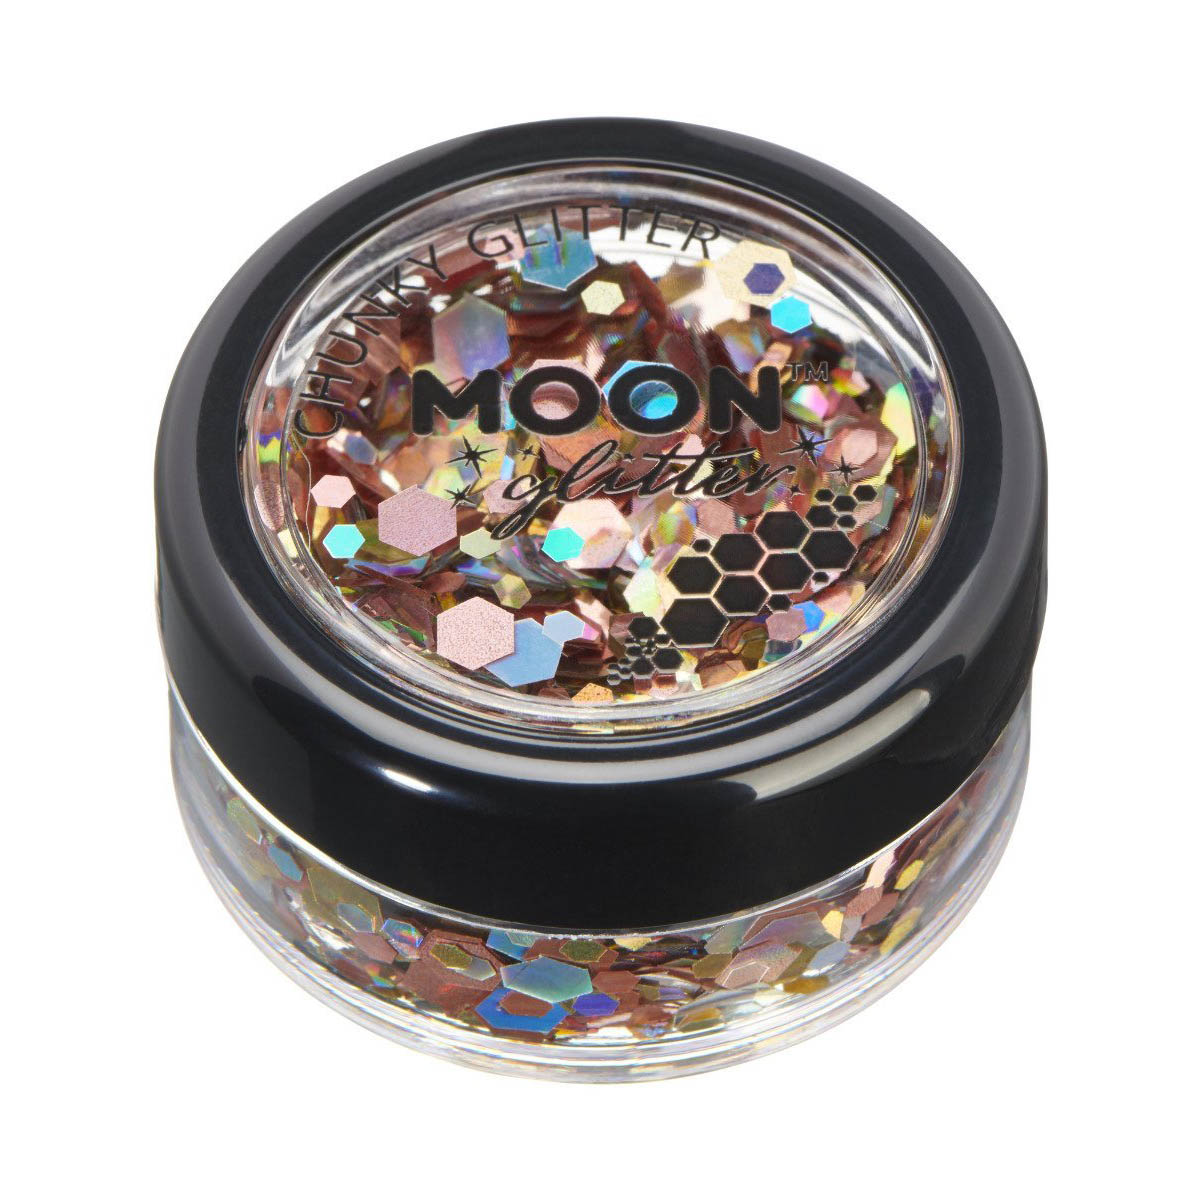 Moon mystic glitter, chunky mix flakes 3 g Prosecco